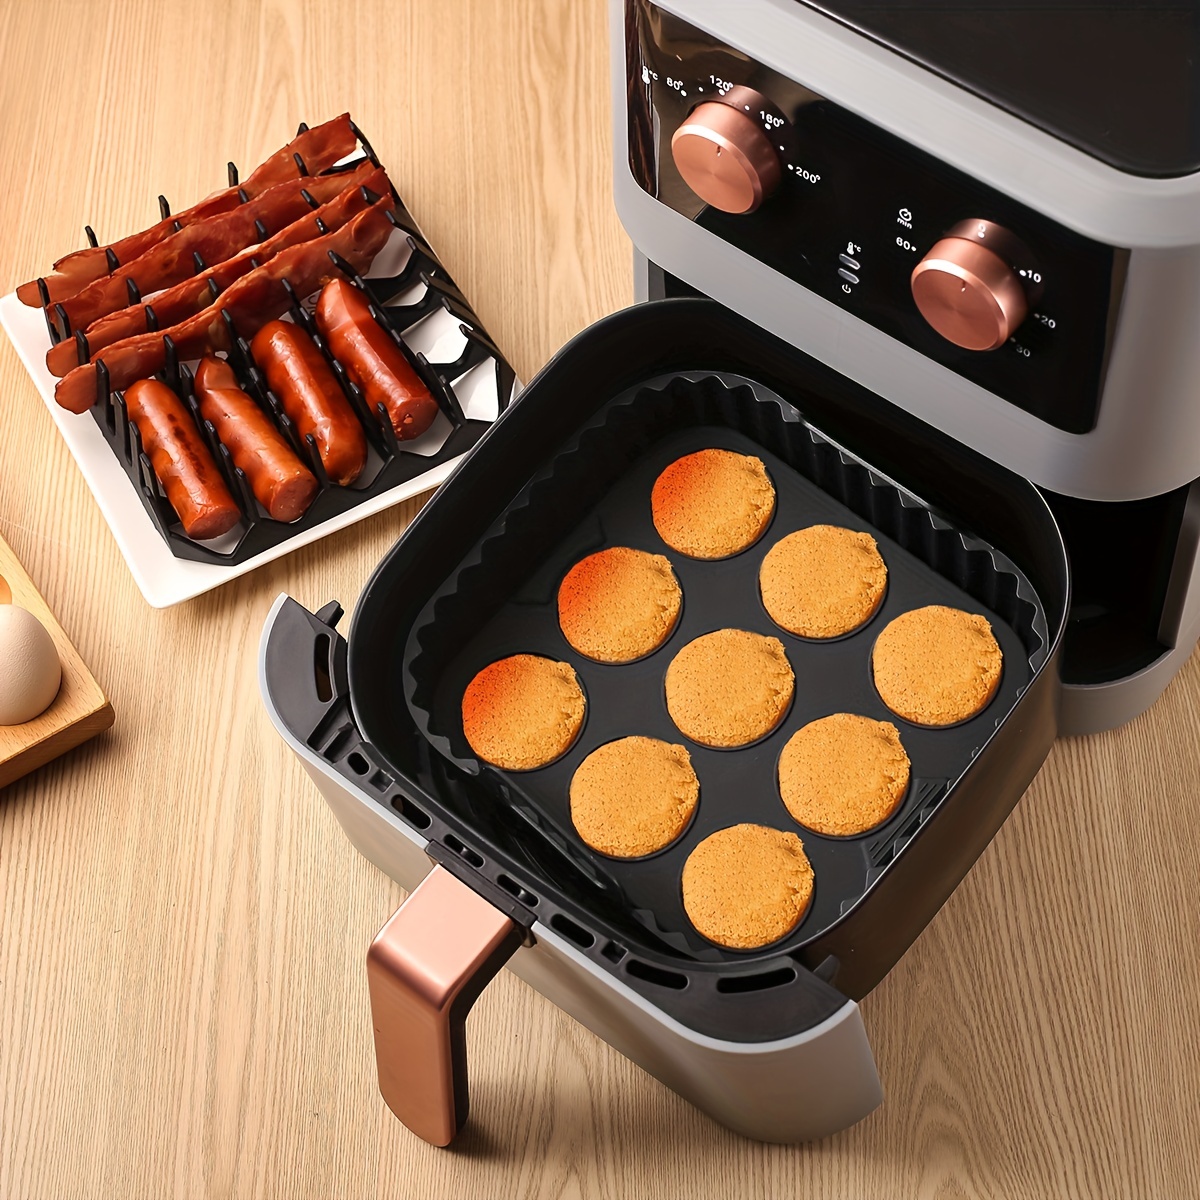 Square Silicone Air Fryer Accessories,, Bacon & Hot Dog Rack, 9